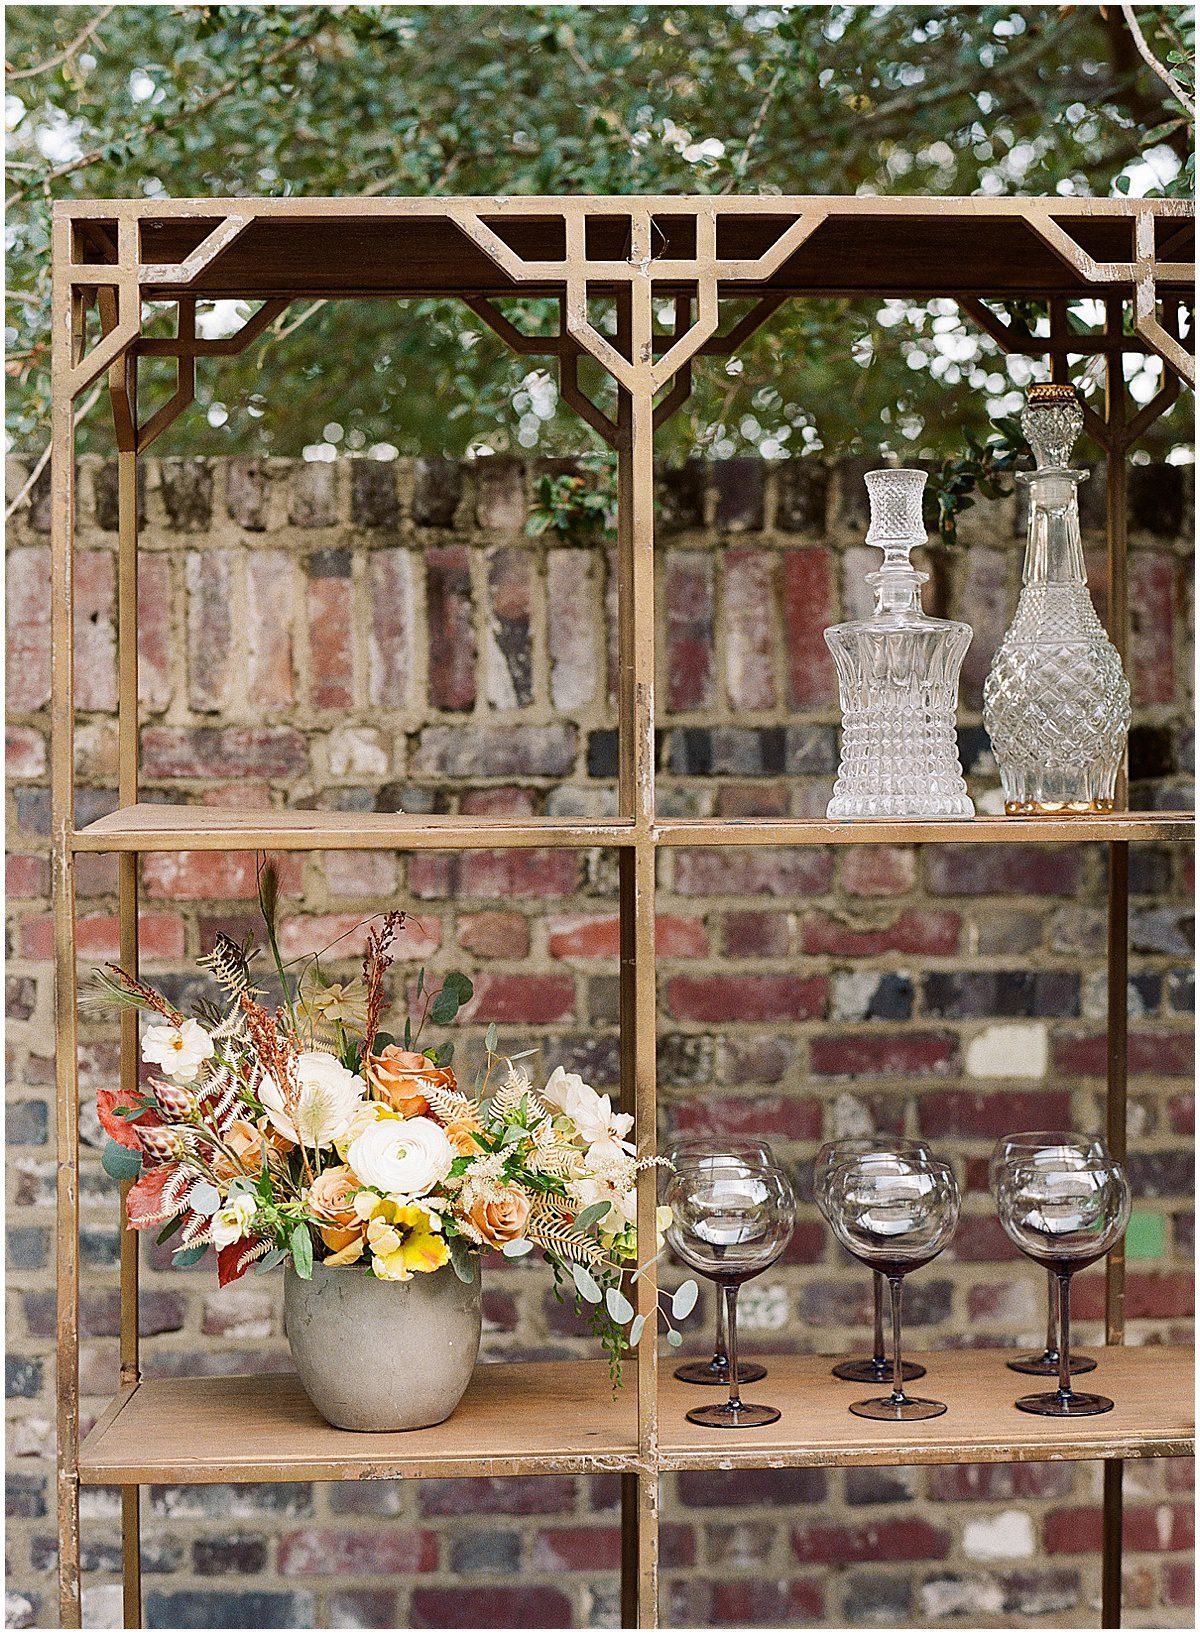 Gold Metal Shelf with Wine Glasses and Flowers Photo